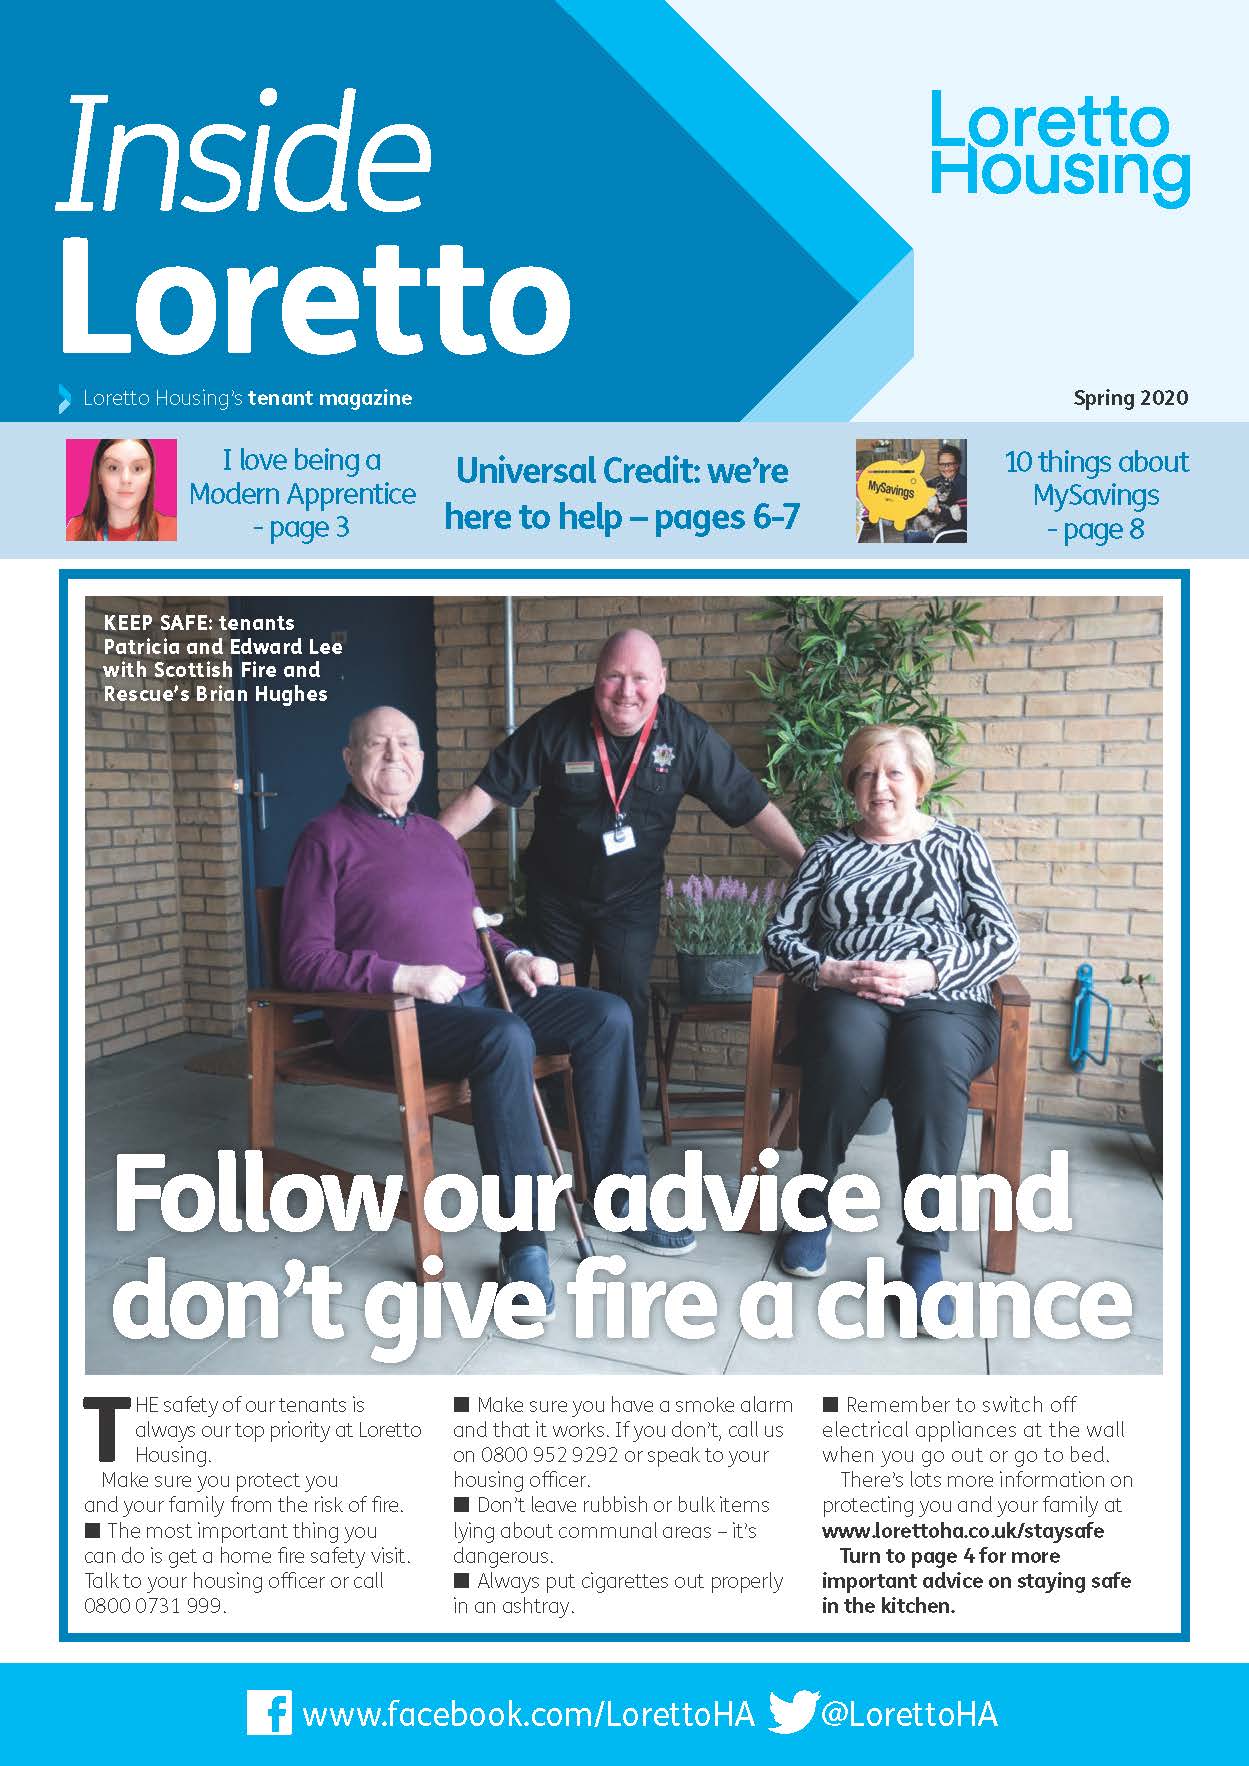 The Spring issue of Inside Loretto is out now